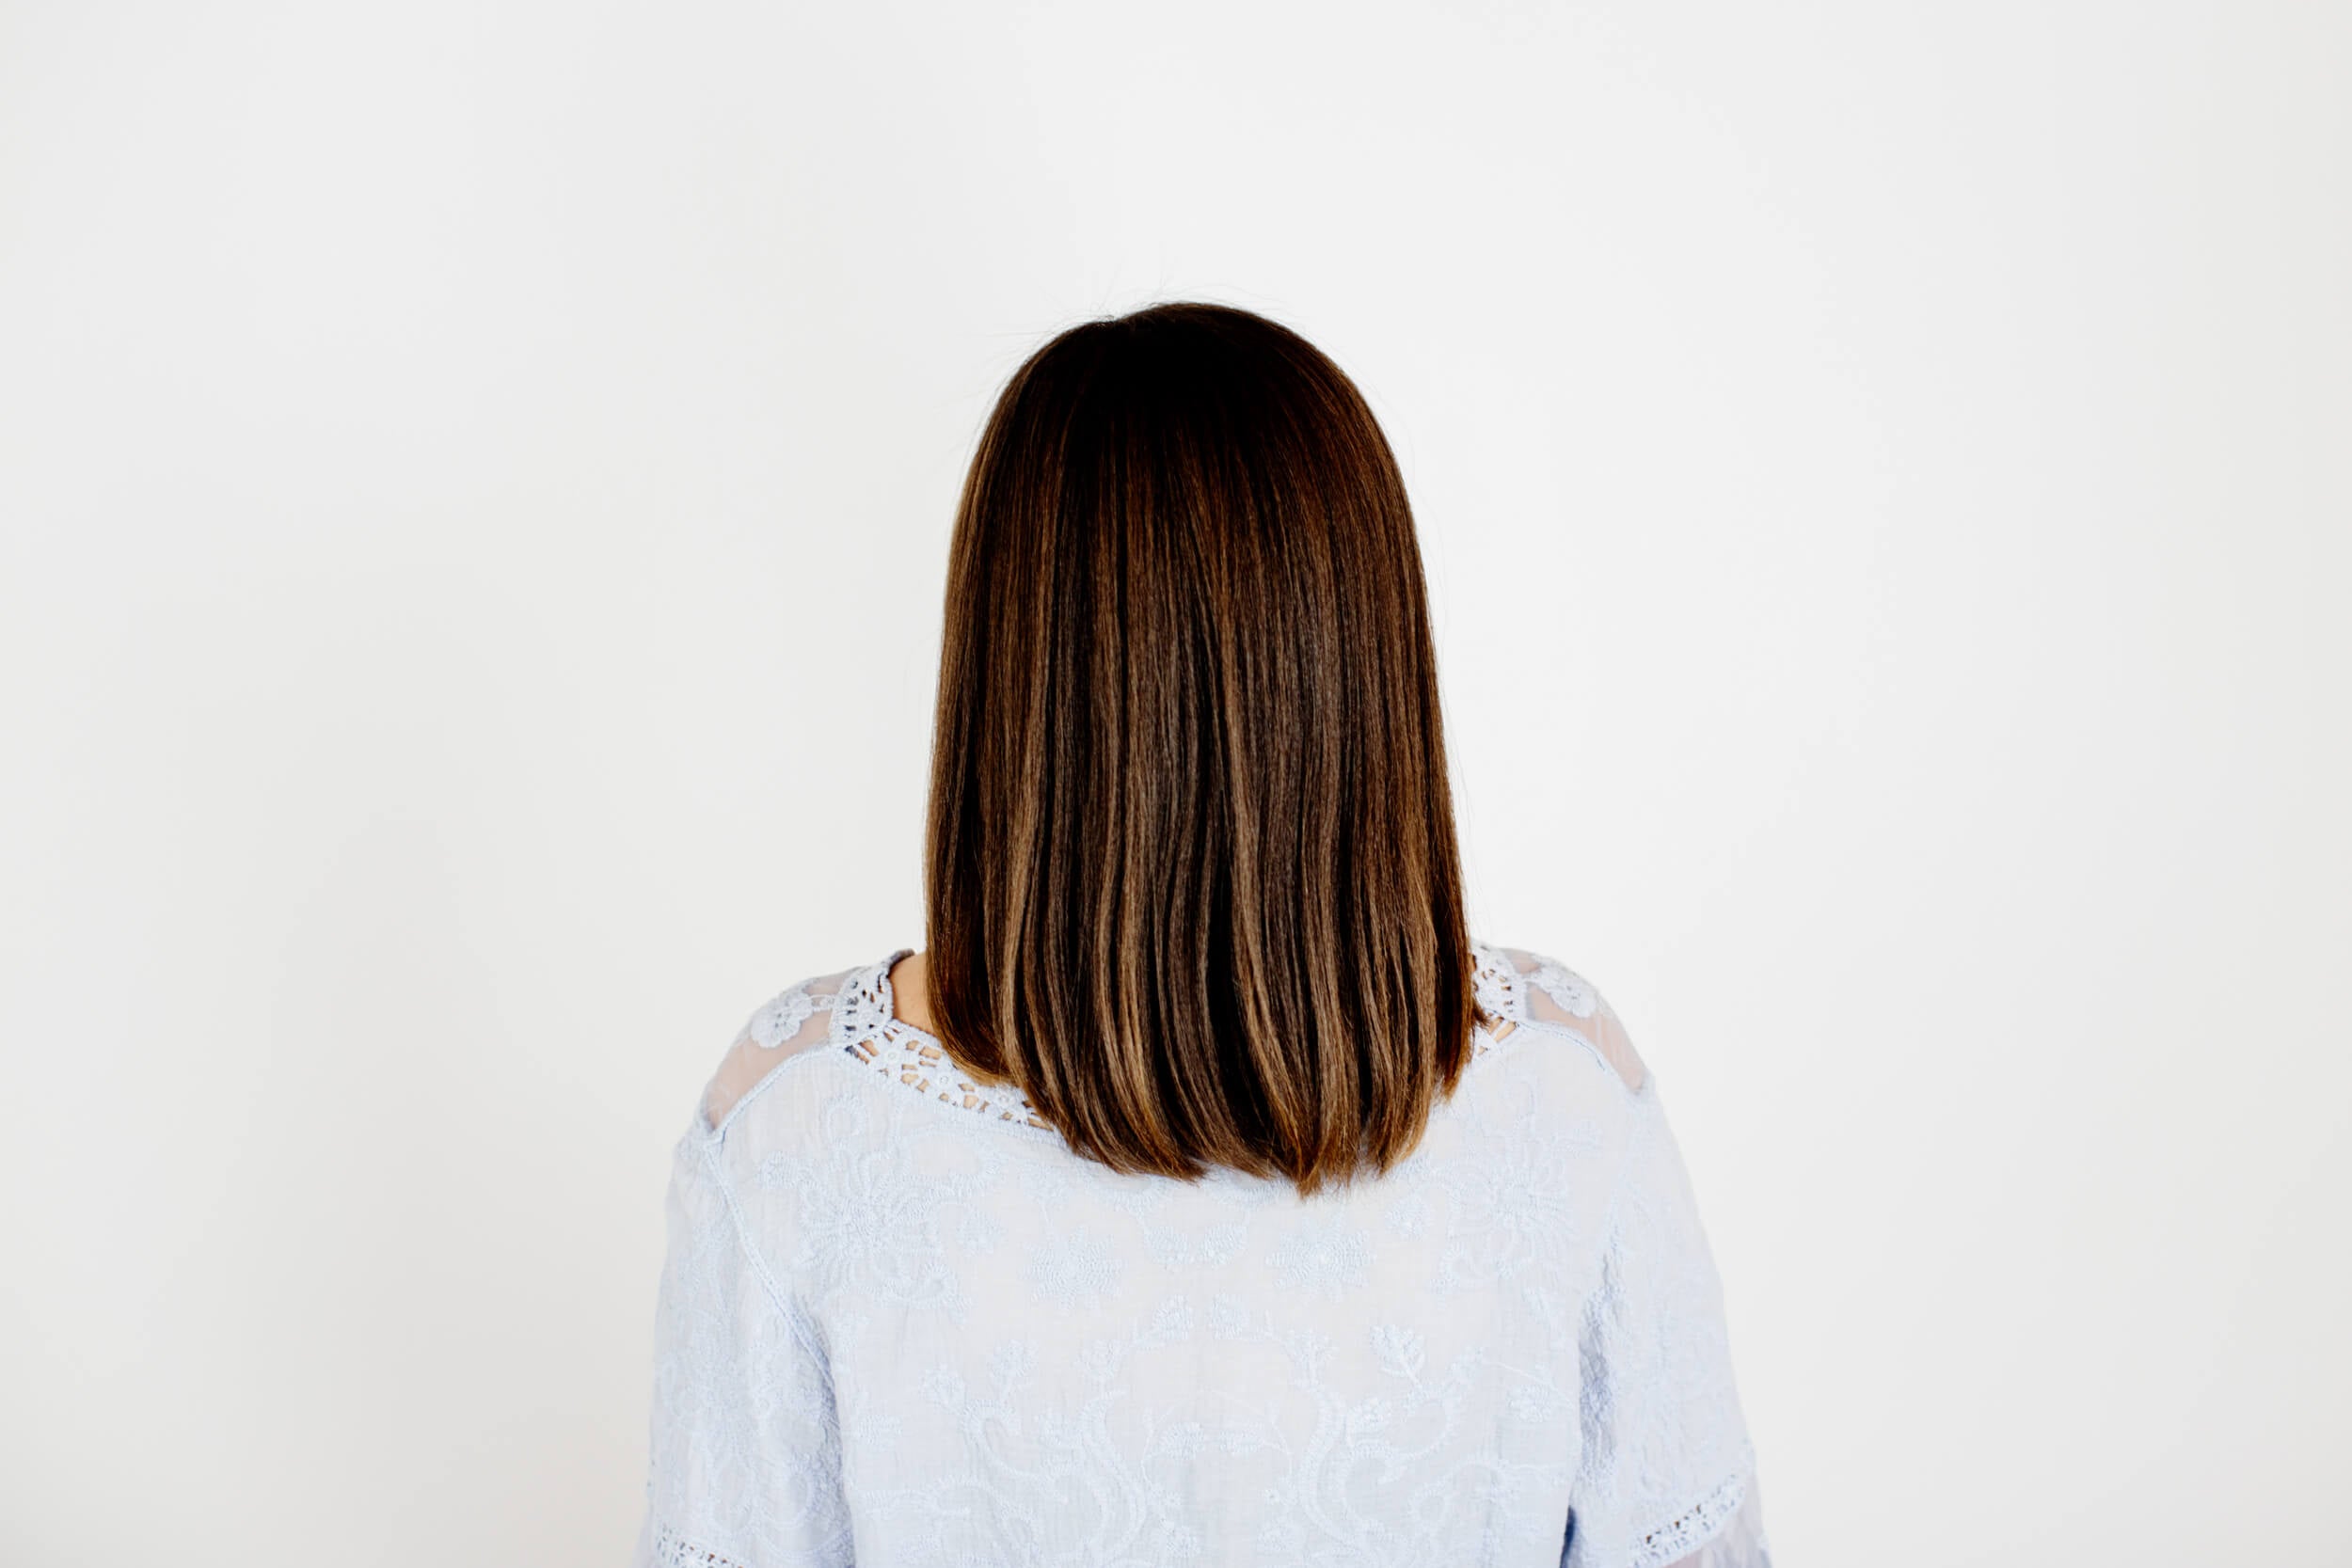 A woman shows the back of her hair that has been straightened.